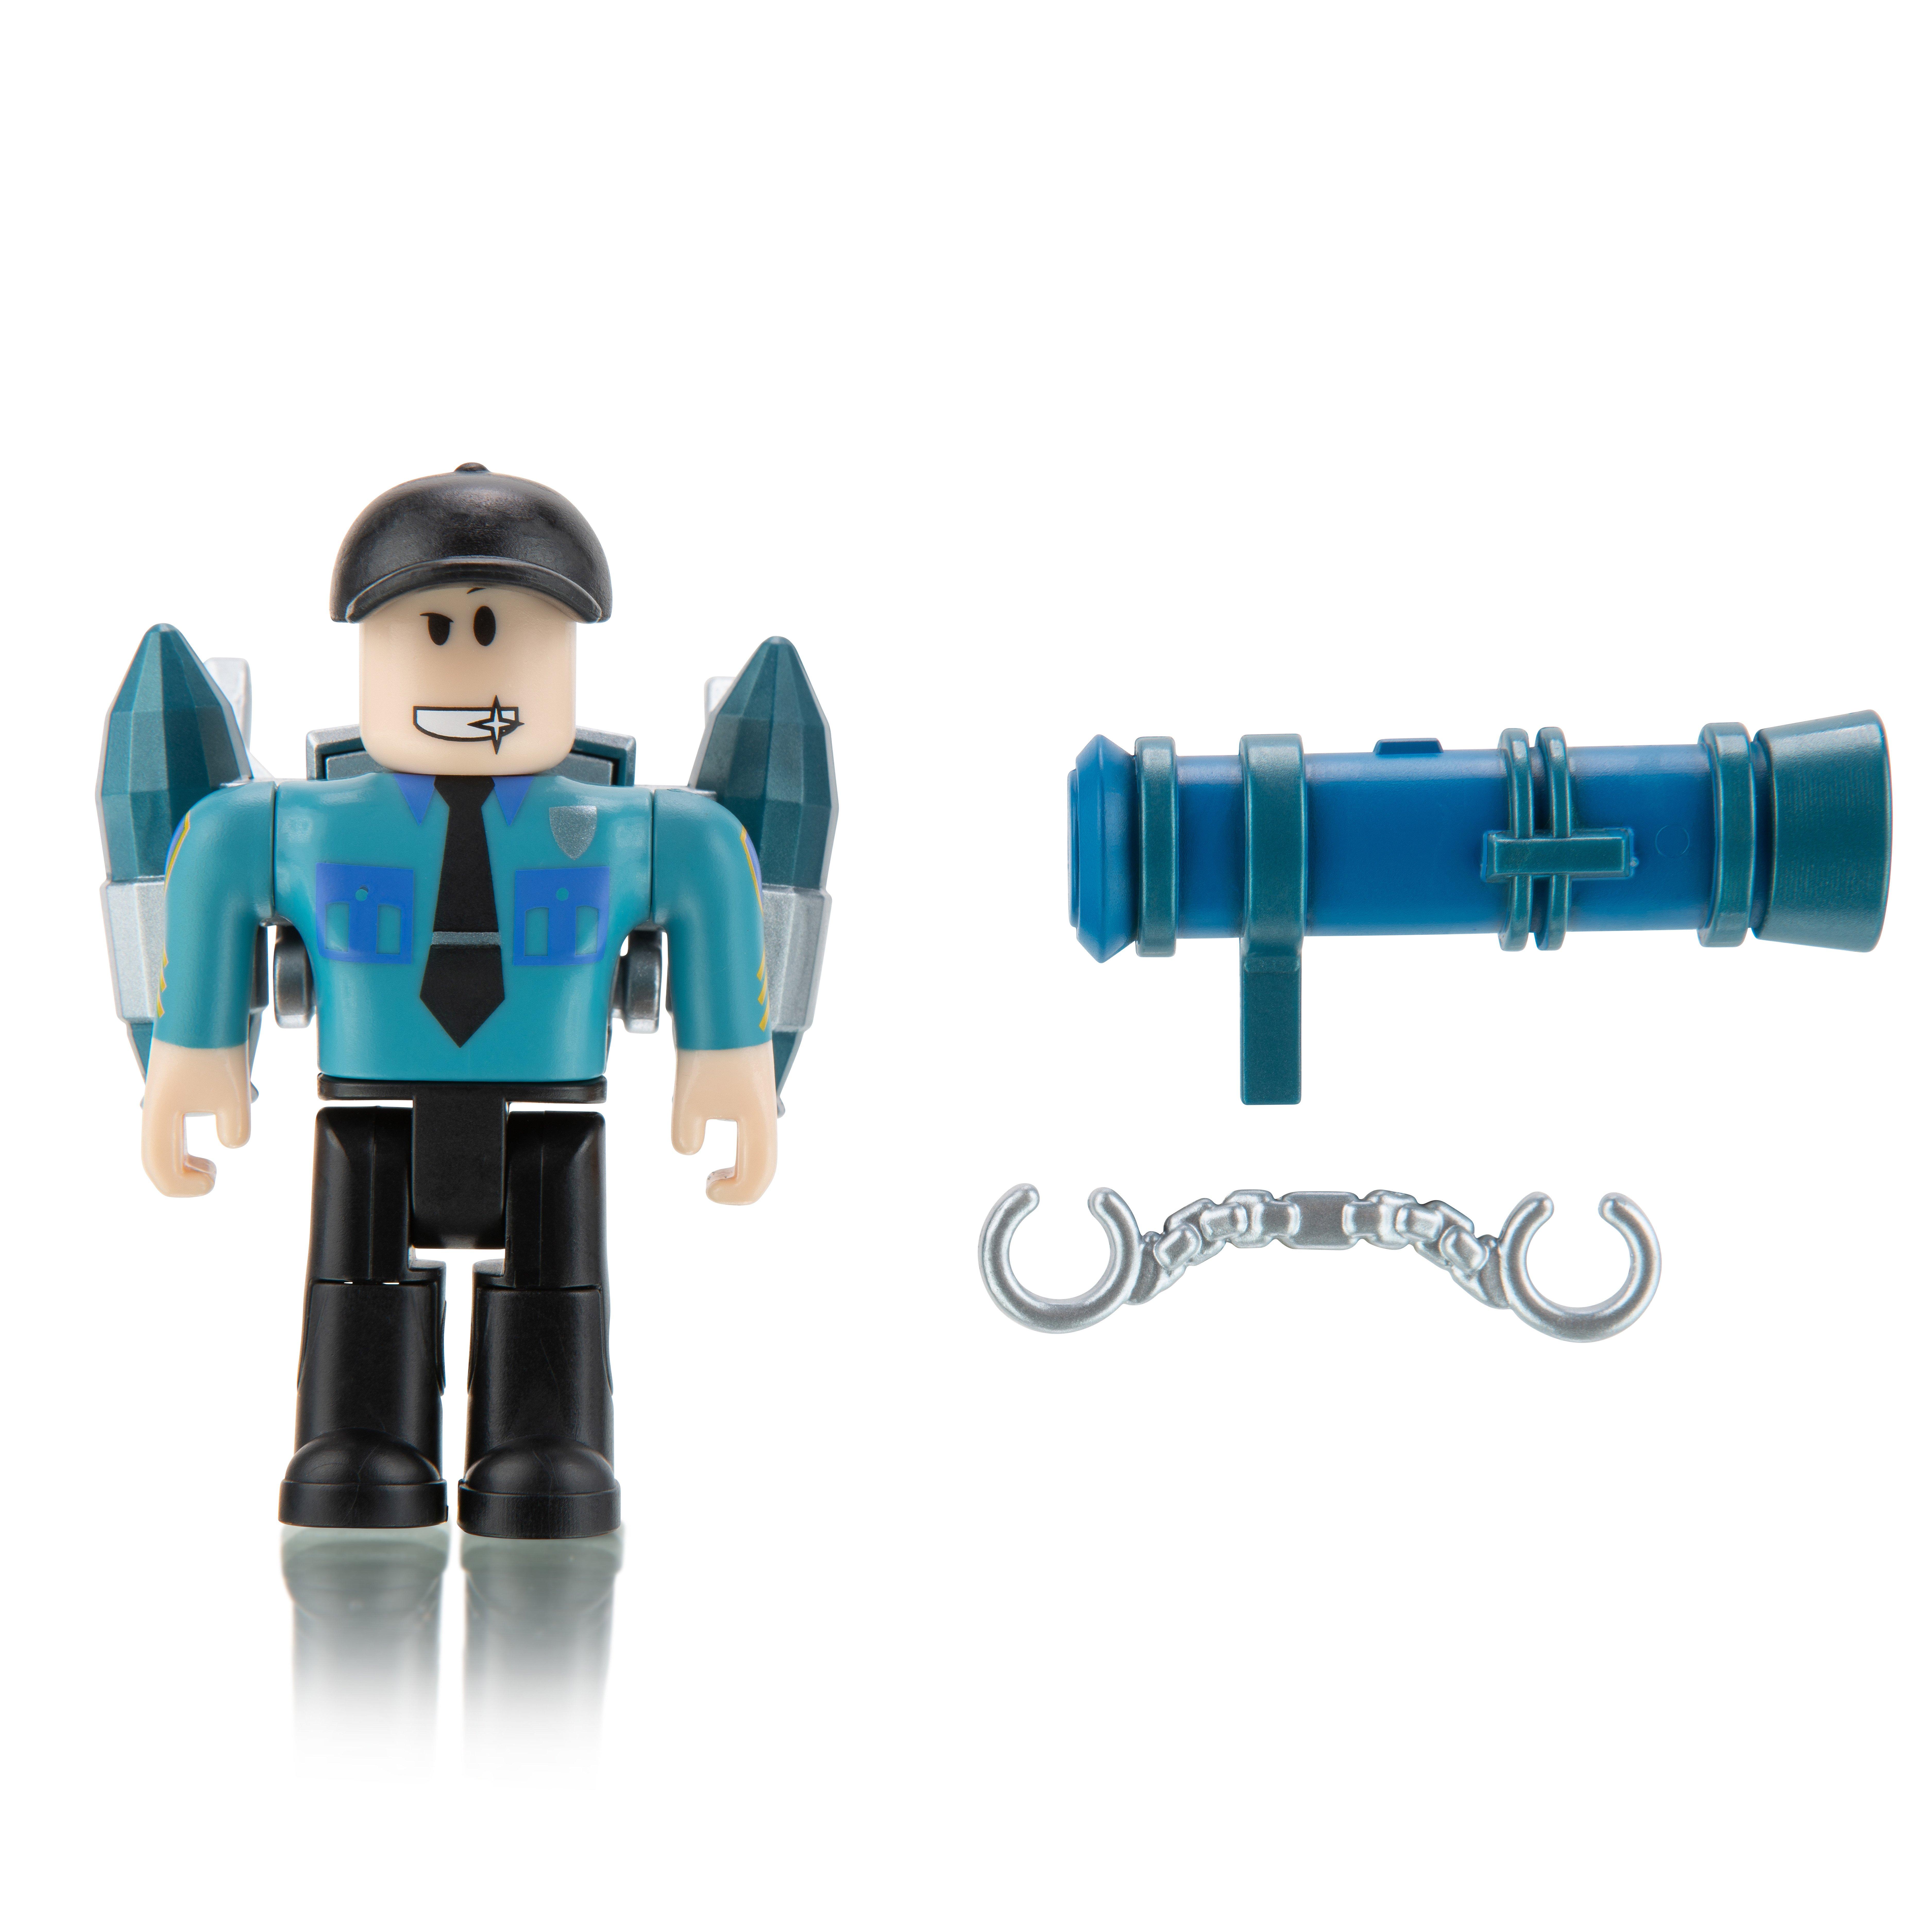 Roblox Action Collection Single Figure Pack Includes 1 Exclusive Virtual Item Styles May Vary Gamestop - roblox buff noob toy item